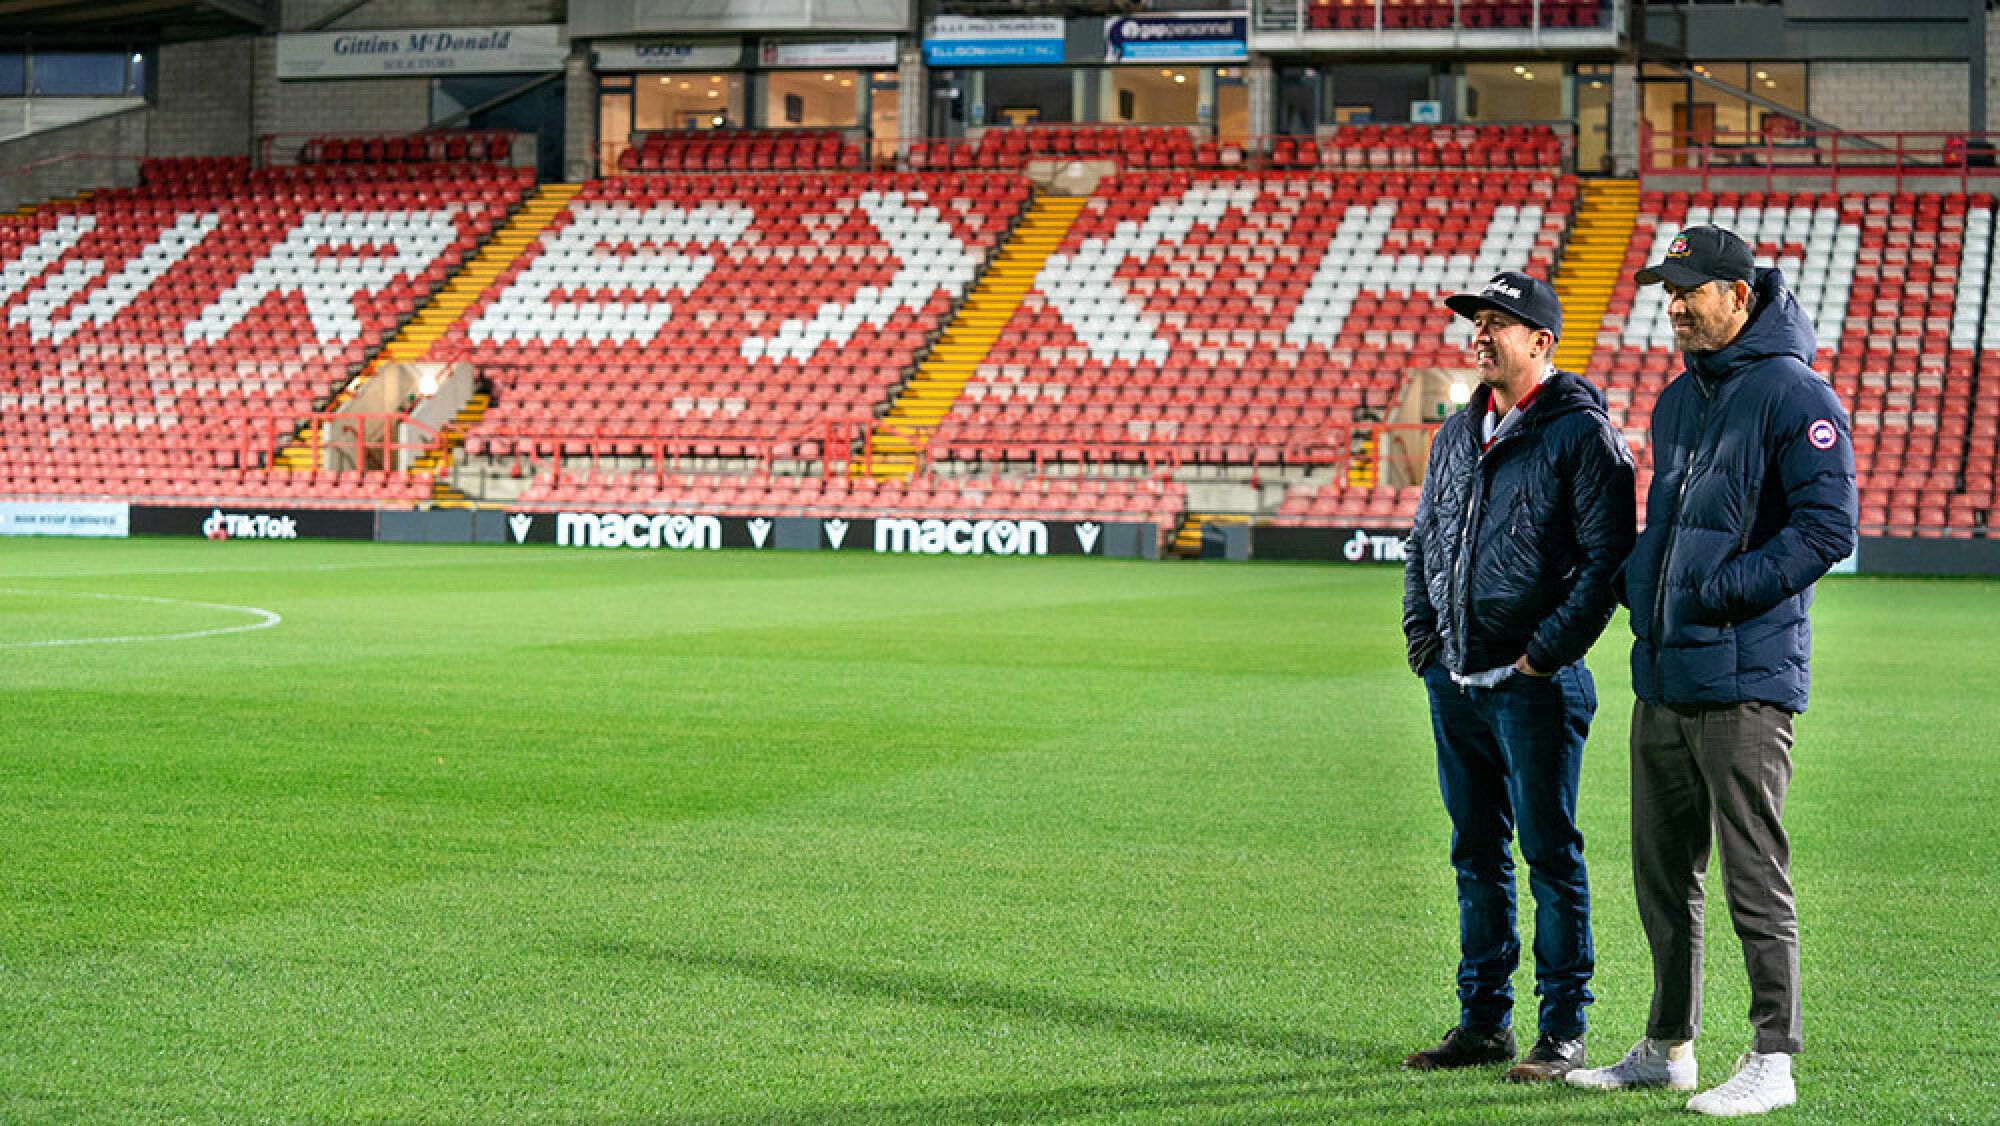 Two men stand on the empty pitch of a football stadium, with the word "Wrexham" spelled out on the seats in the background.